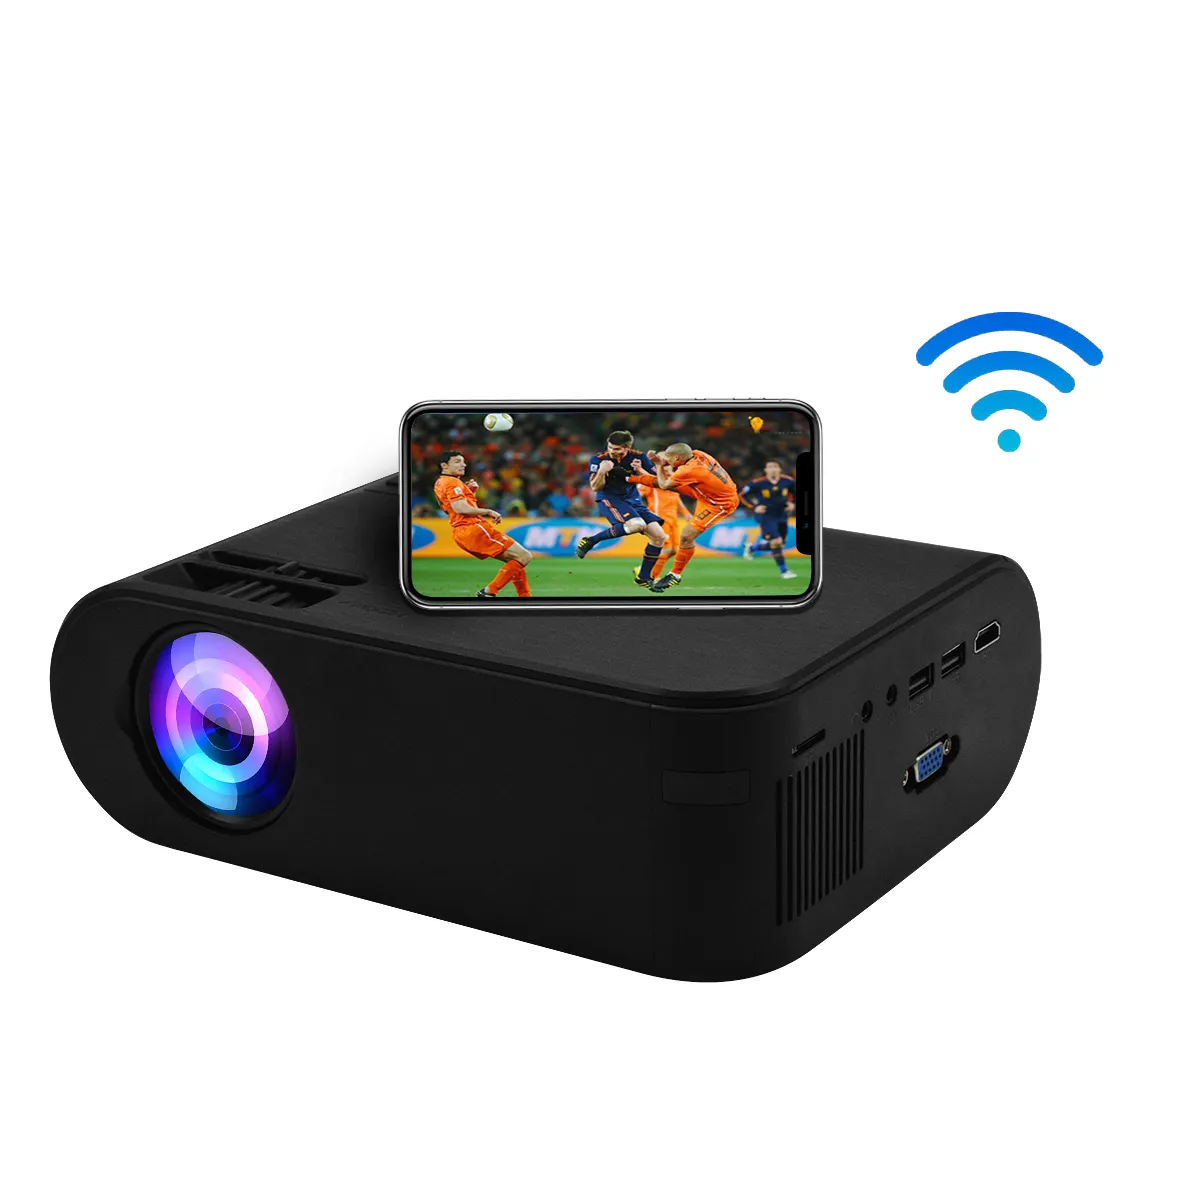 Home cinema AN21 mini projector 720p android projector 4k projector with tv hd usb tf port Screen mirror